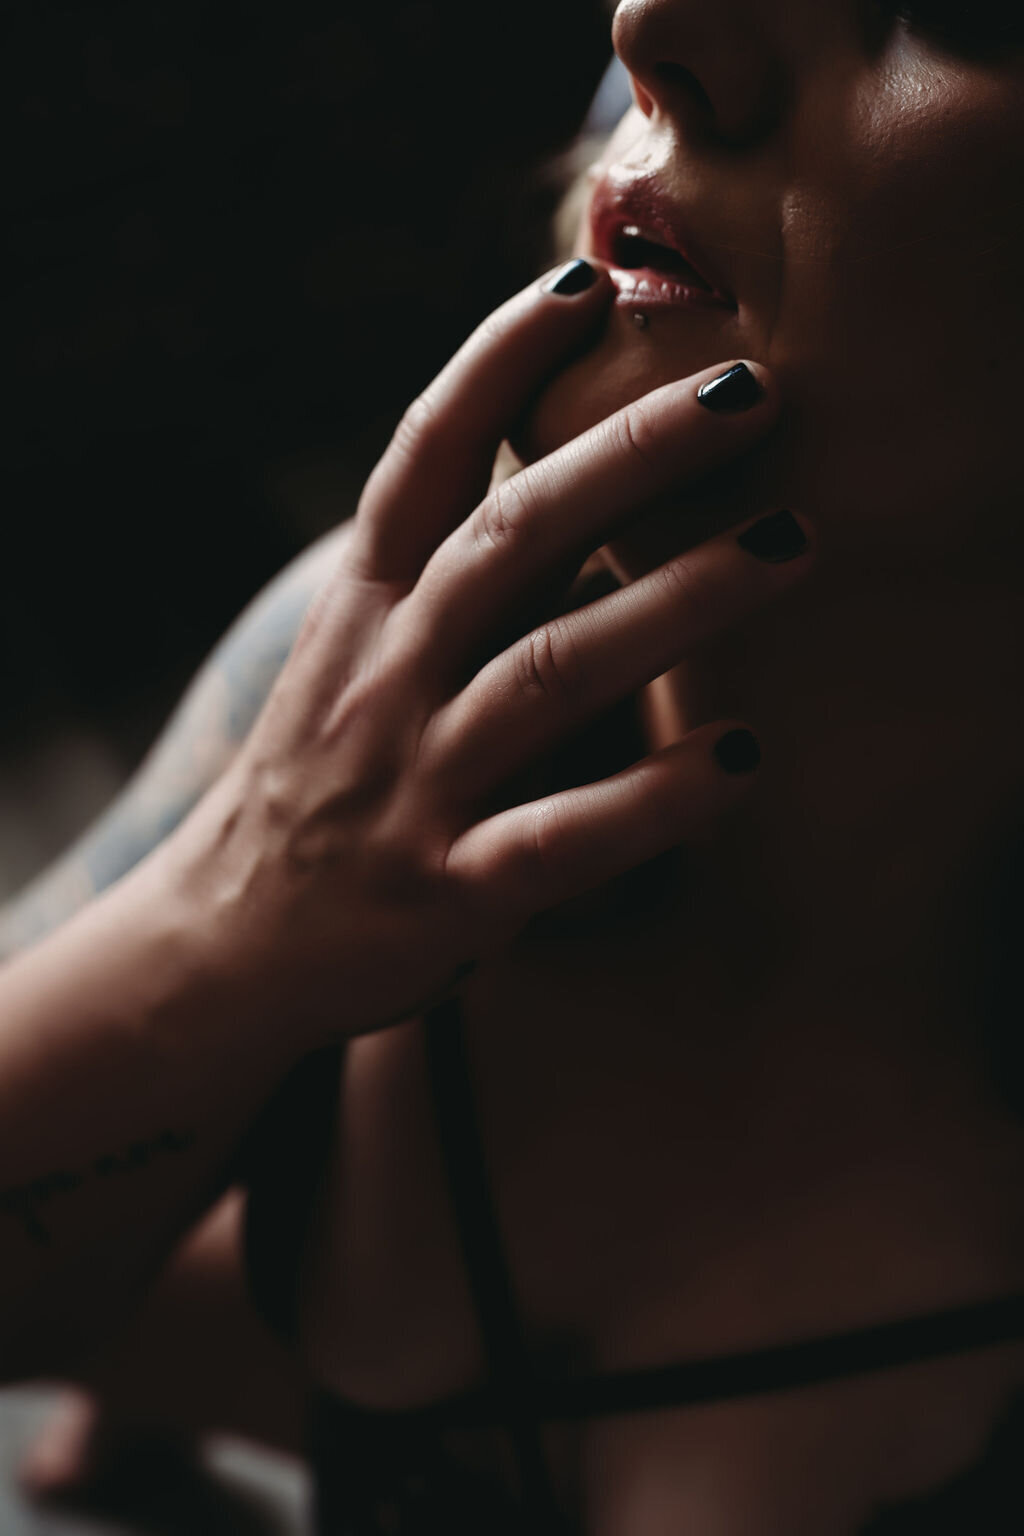 close up boudoir image of woman in black lingerie showing breasts with hand on lips